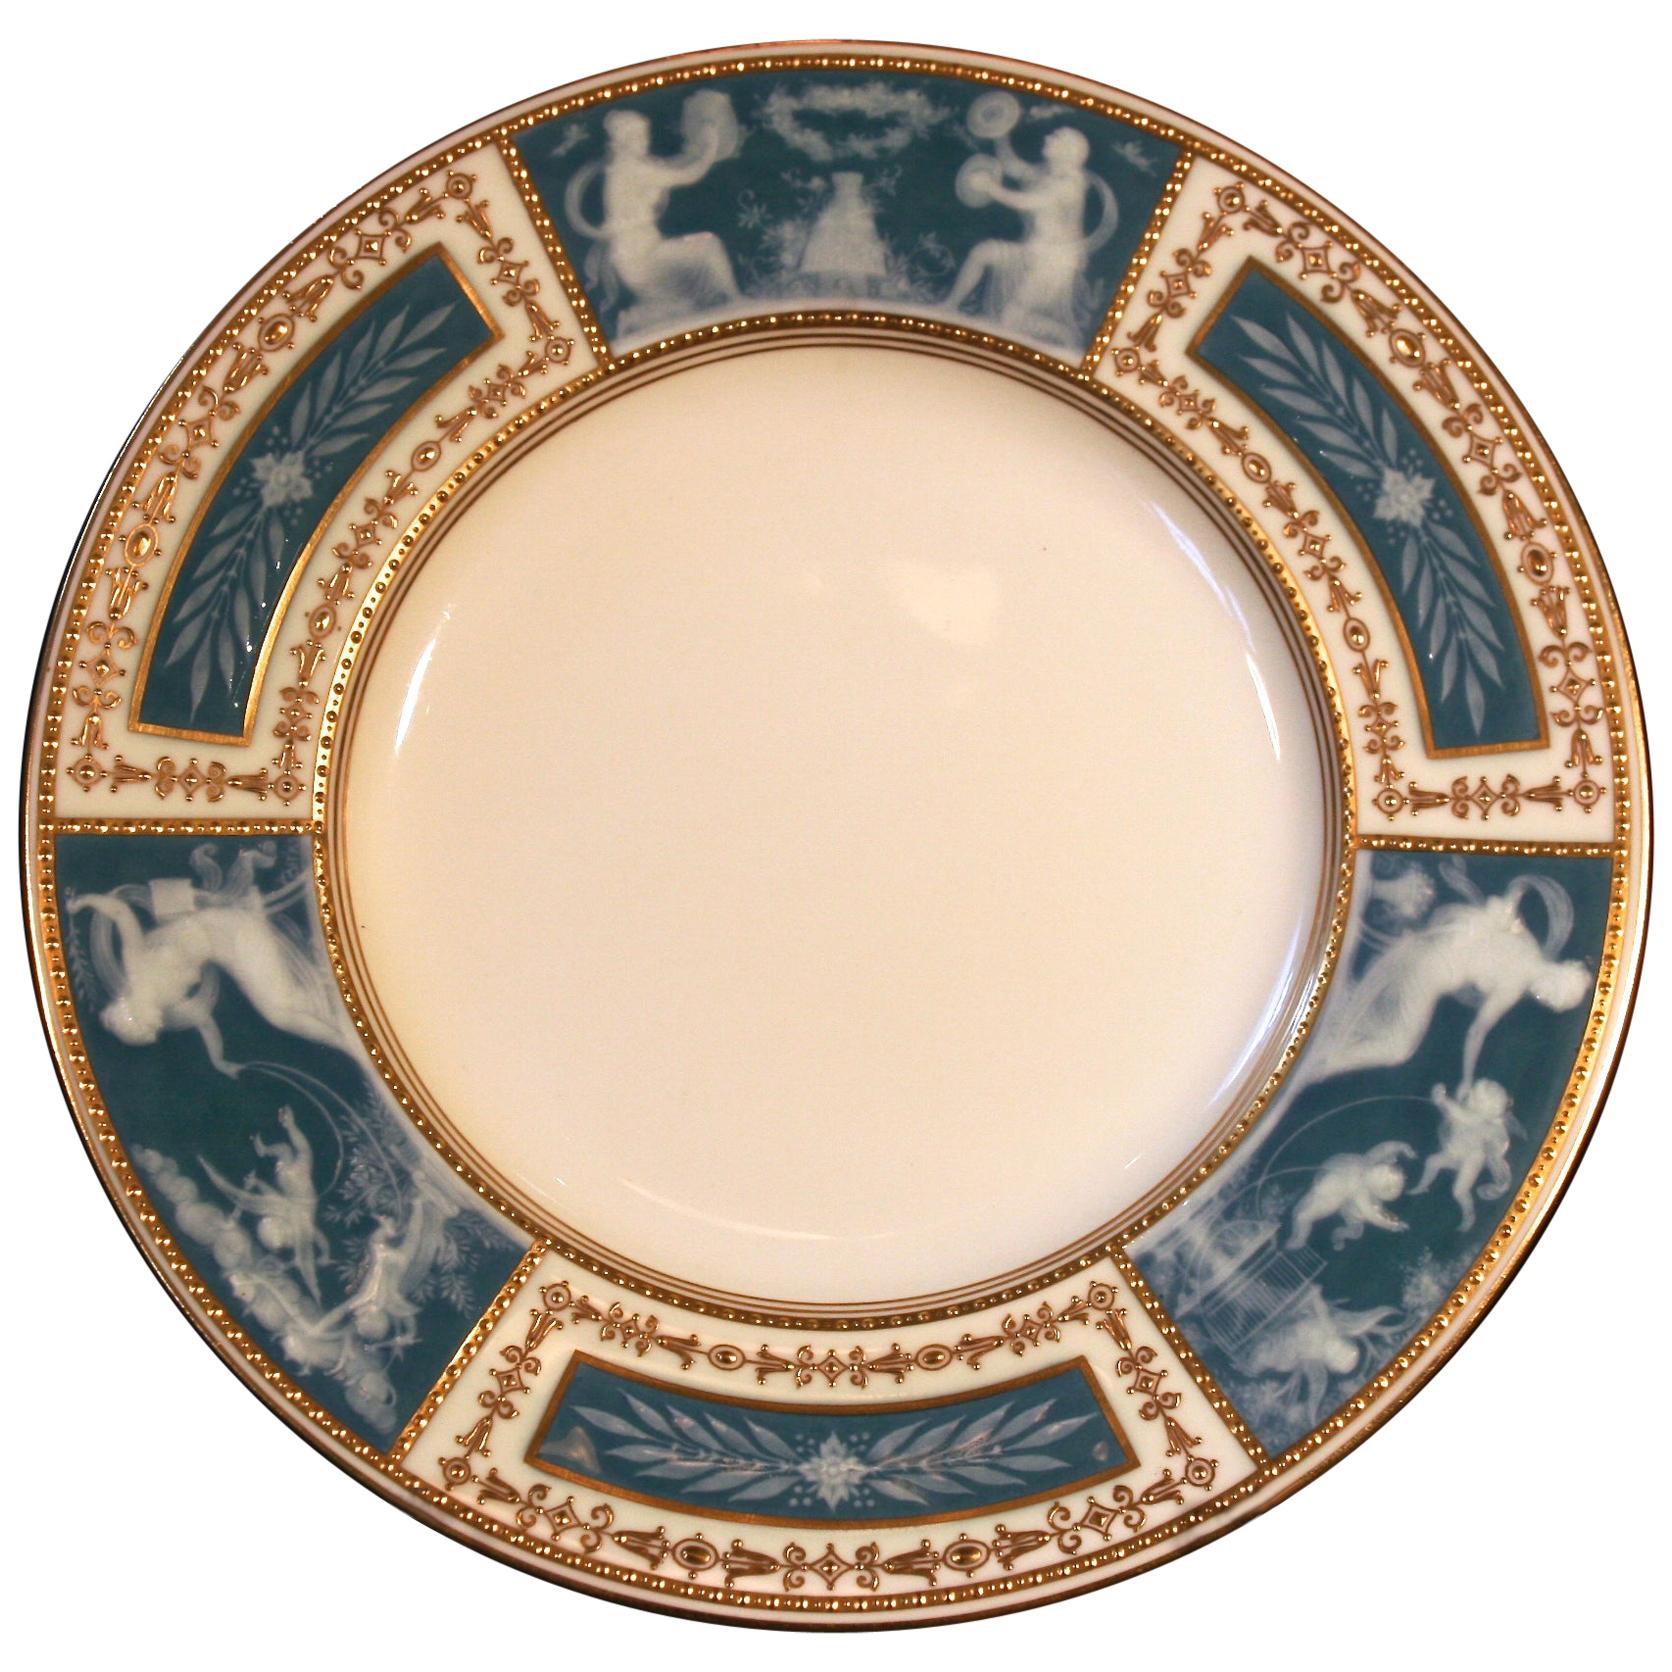 8 Minton Pate-sur-pate Blue Plates for Tiffany, by Artist Albion Birks For Sale